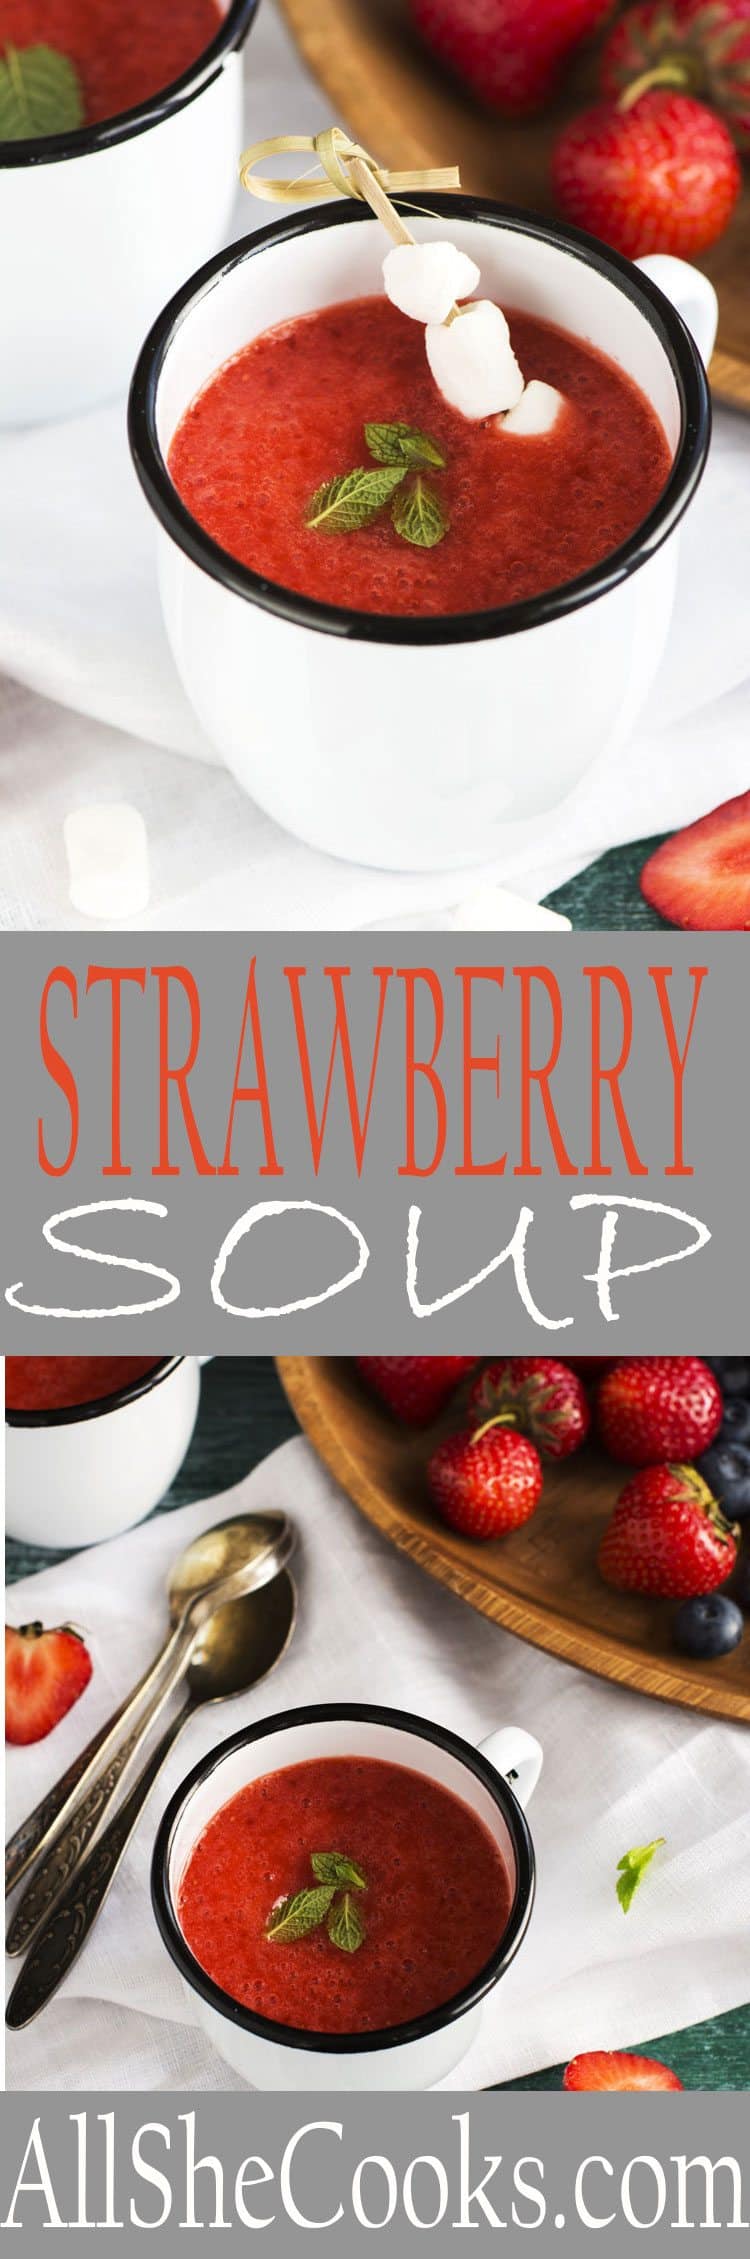 Strawberry Soup recipe is a perfect soup for a sweet dinner treat or starter for a romantic meal, maybe for Valentine's Day dinner.